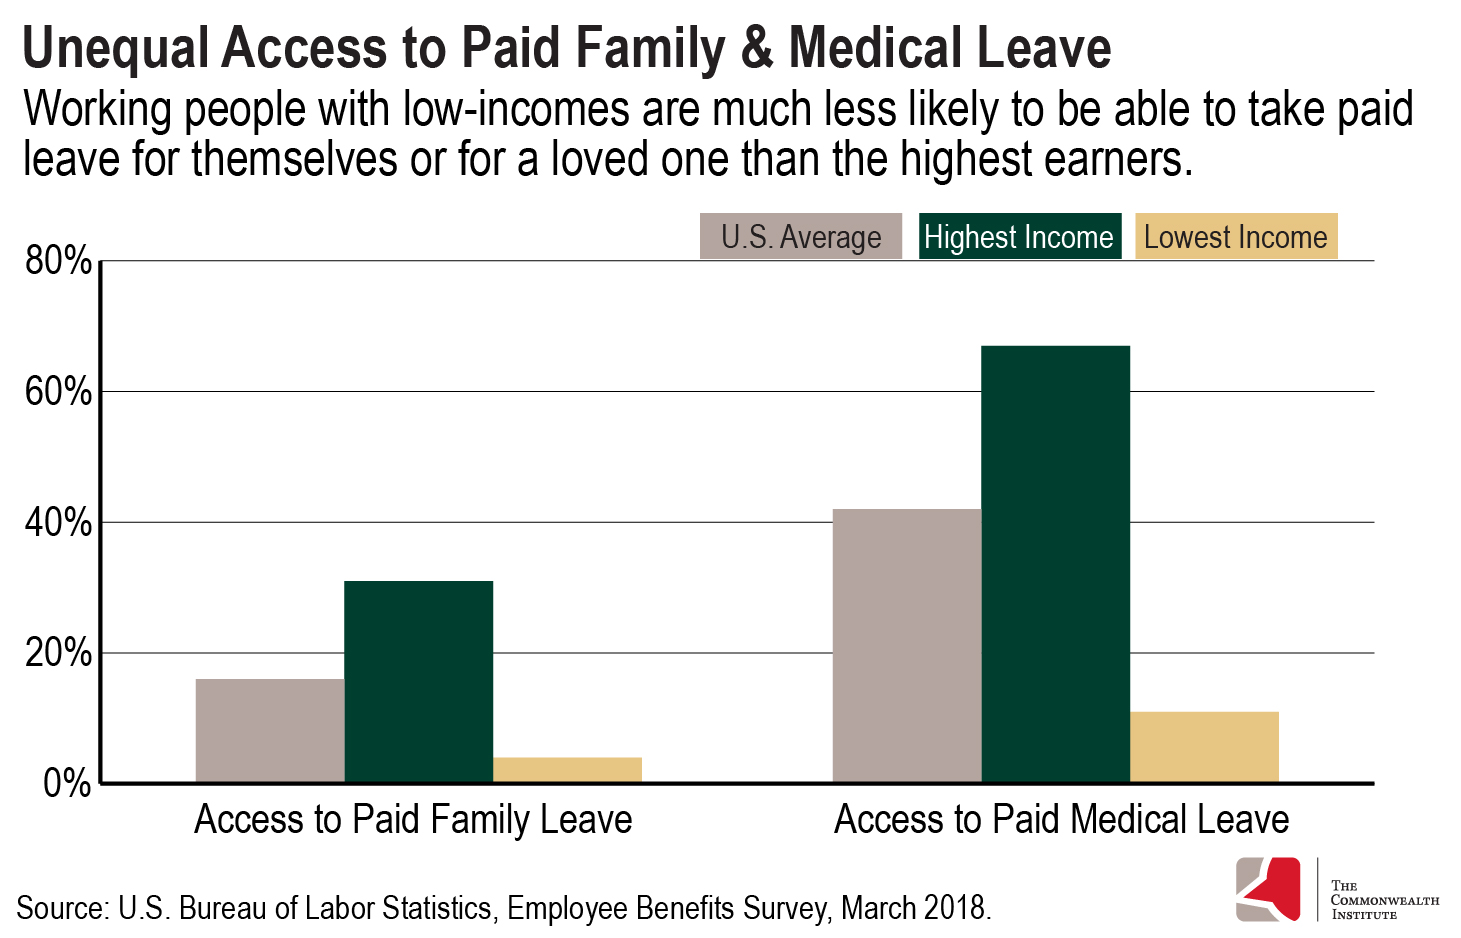 Two bar graphs showing access to paid family and paid medical leave for highest income, lowest income, and U.S. average income. Working people with low incomes are much less likely to be able to take paid leave, according to the U.S. Bureau of Labor Statistics, Employee Benefits Survey, March 2018.